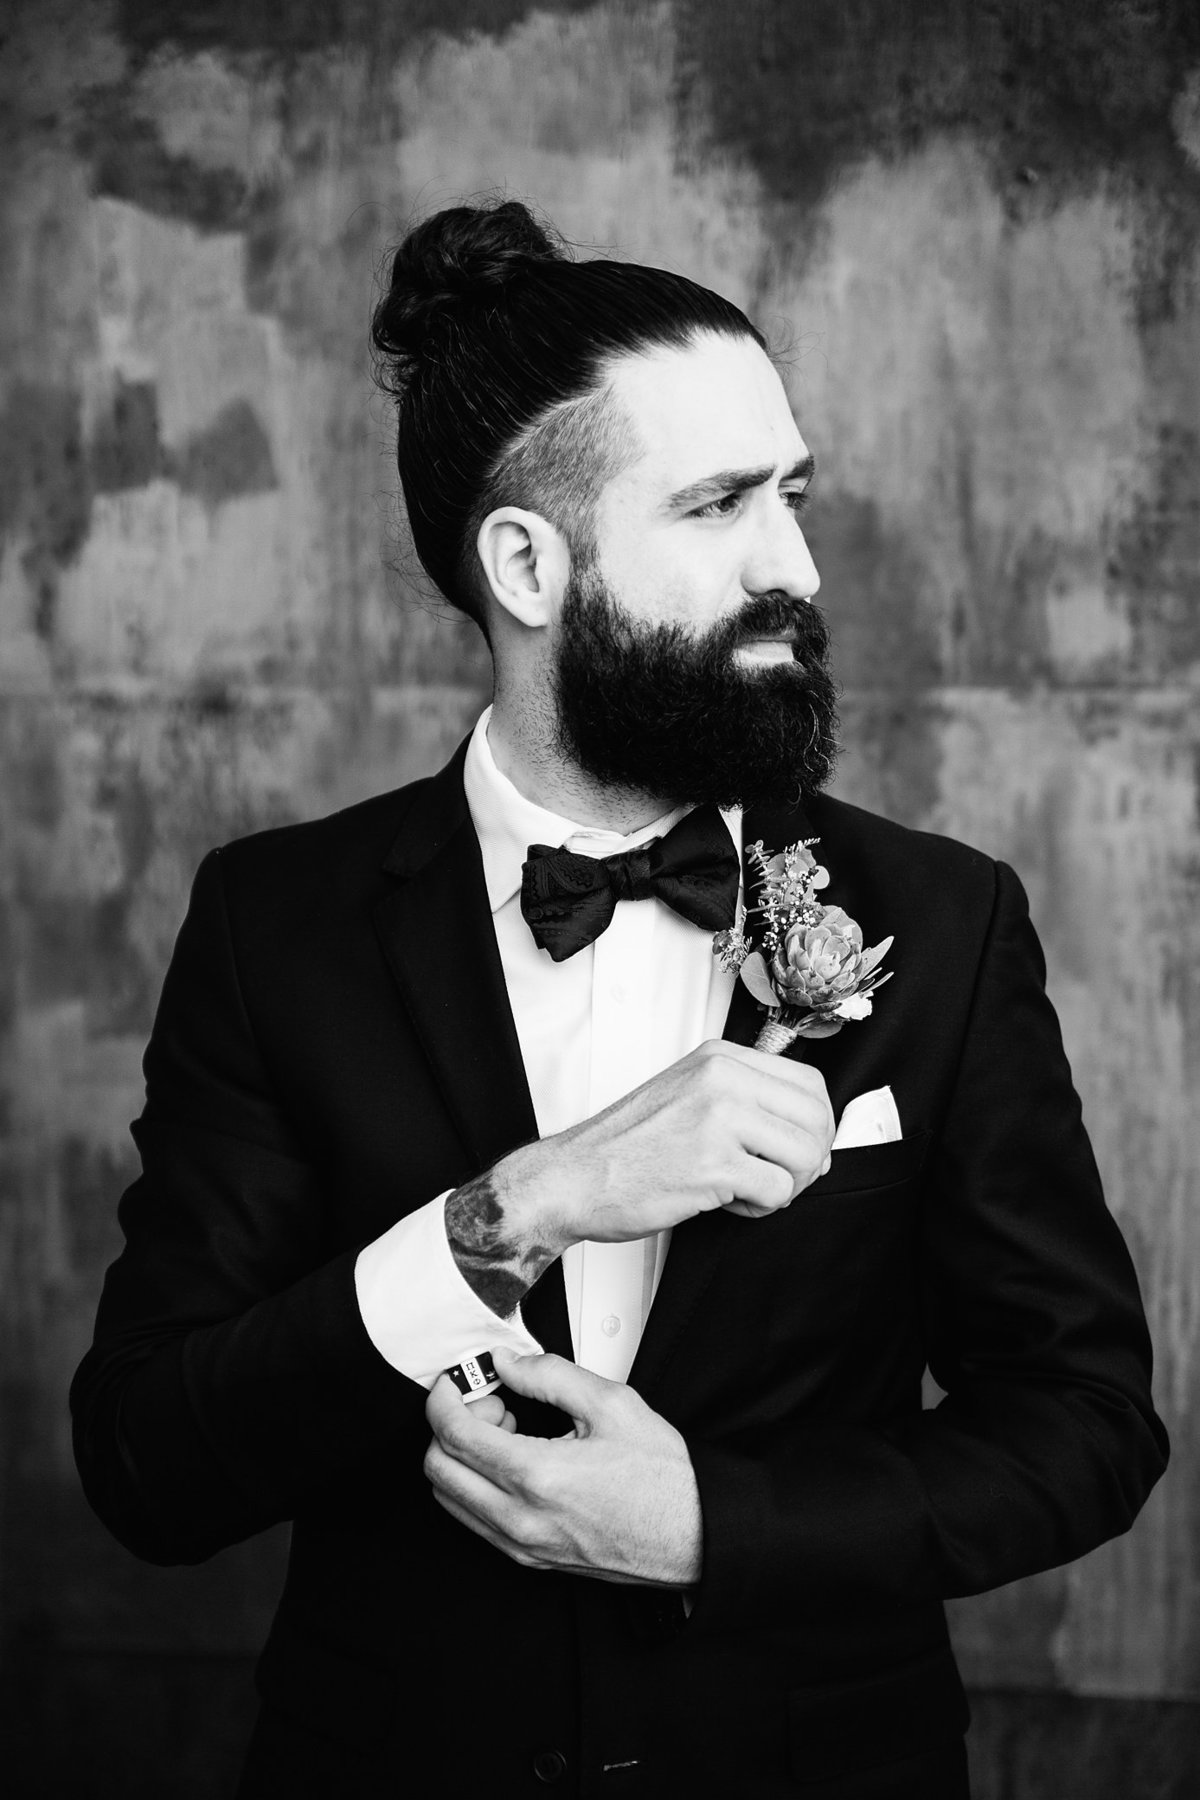 Black and white portrait of a groom by Phoenix wedding photographers PMA Photography.